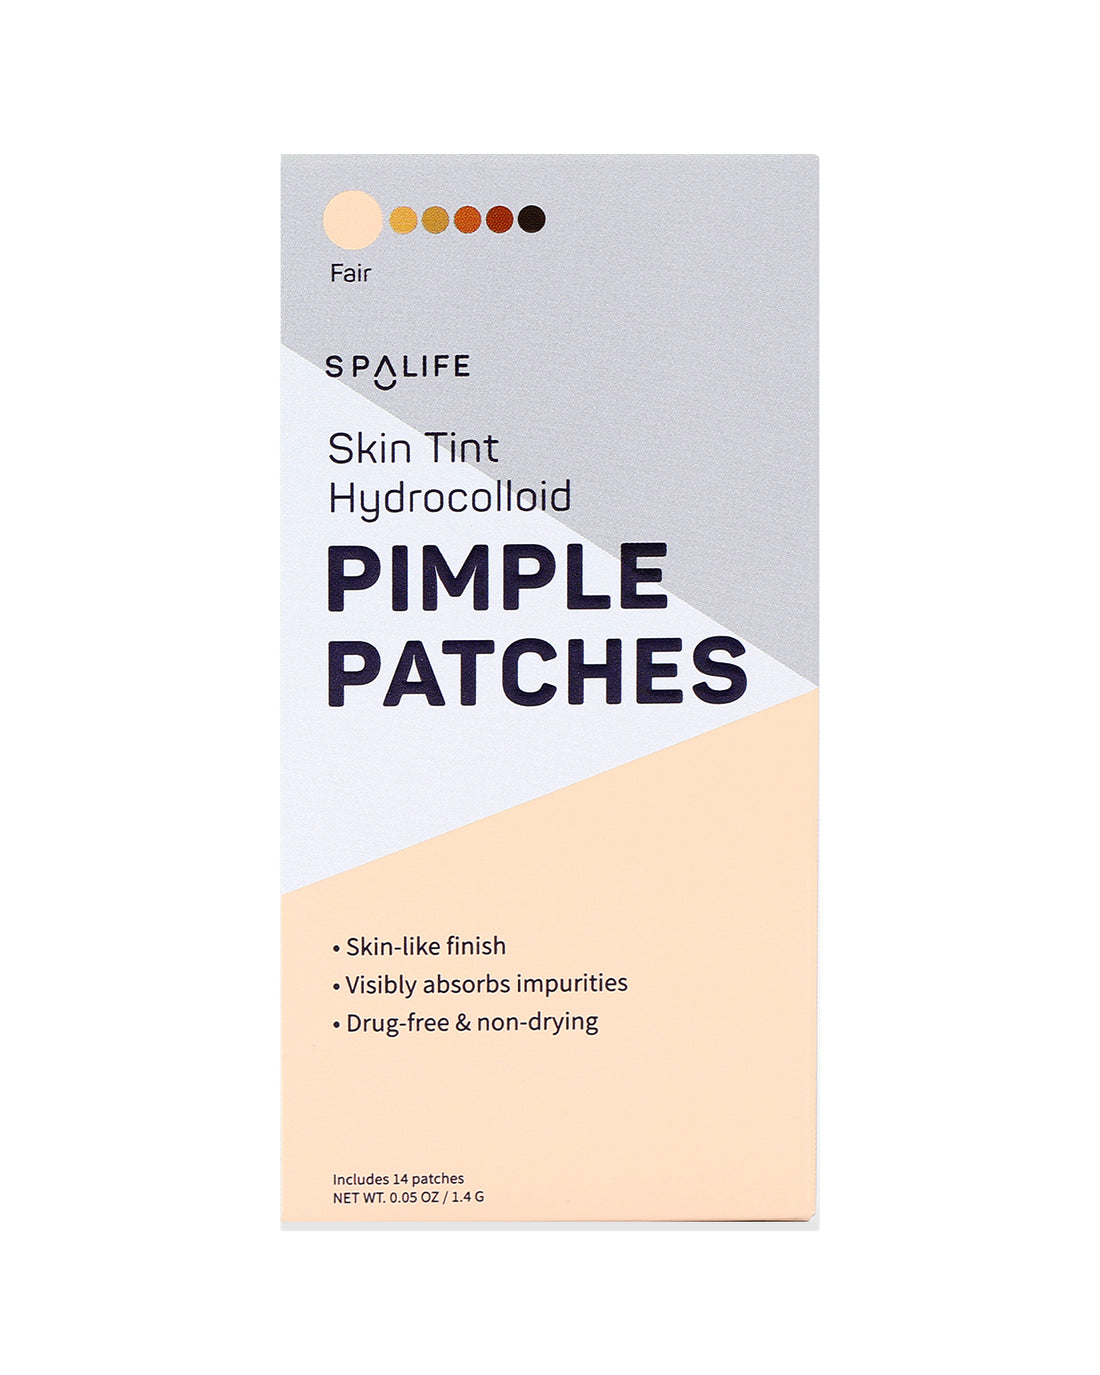 Skin_tint_pimple_patches_packe-443